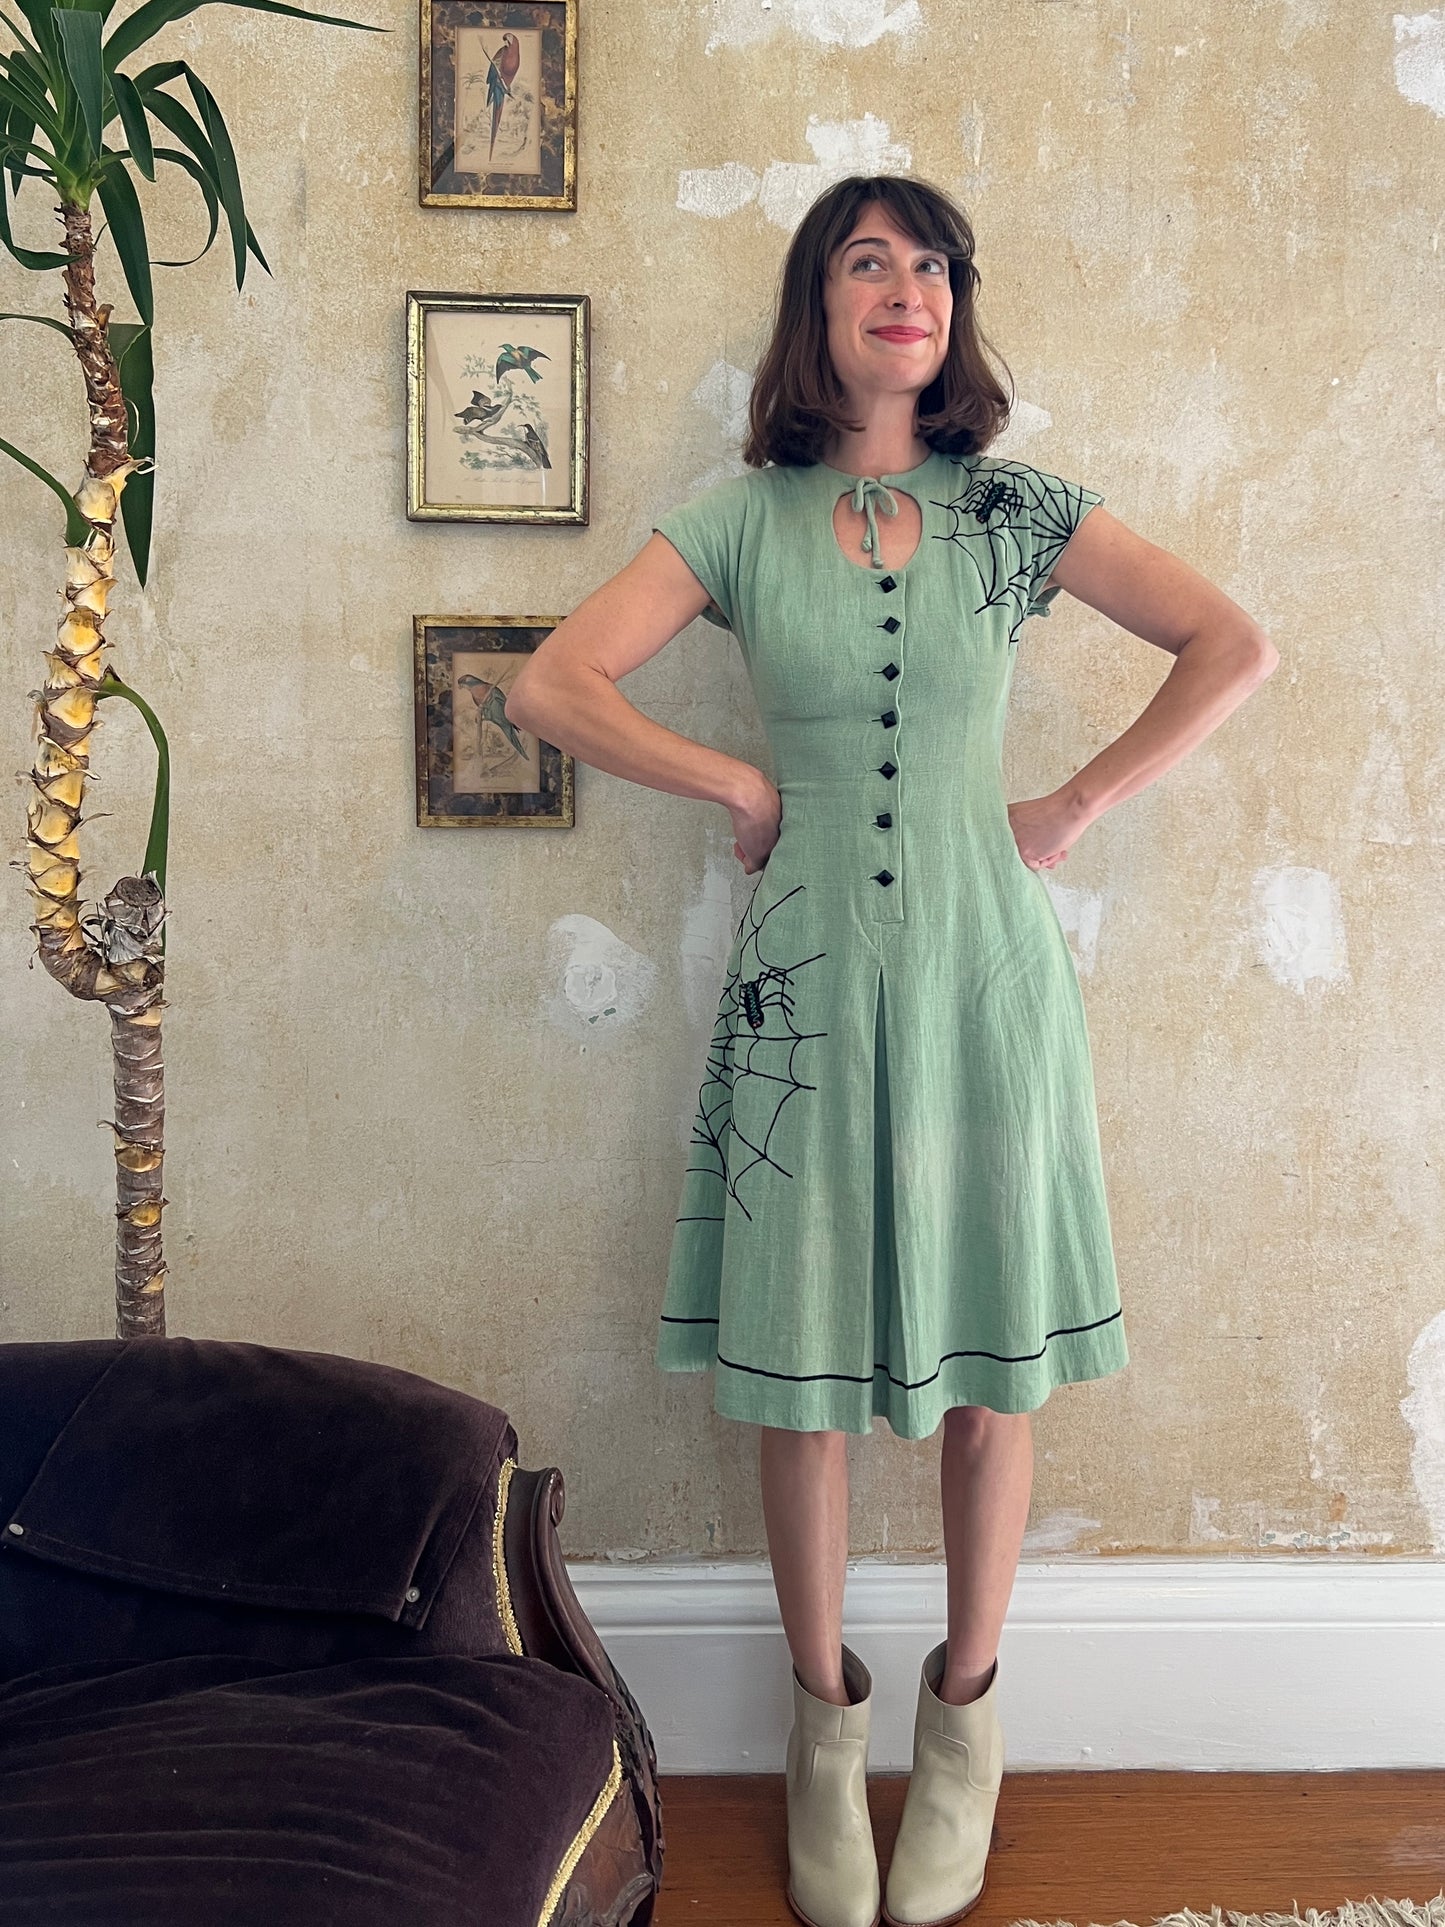 Spiderific! Spooky 1950s Cobweb and Spider Embroidered Dress XS/S